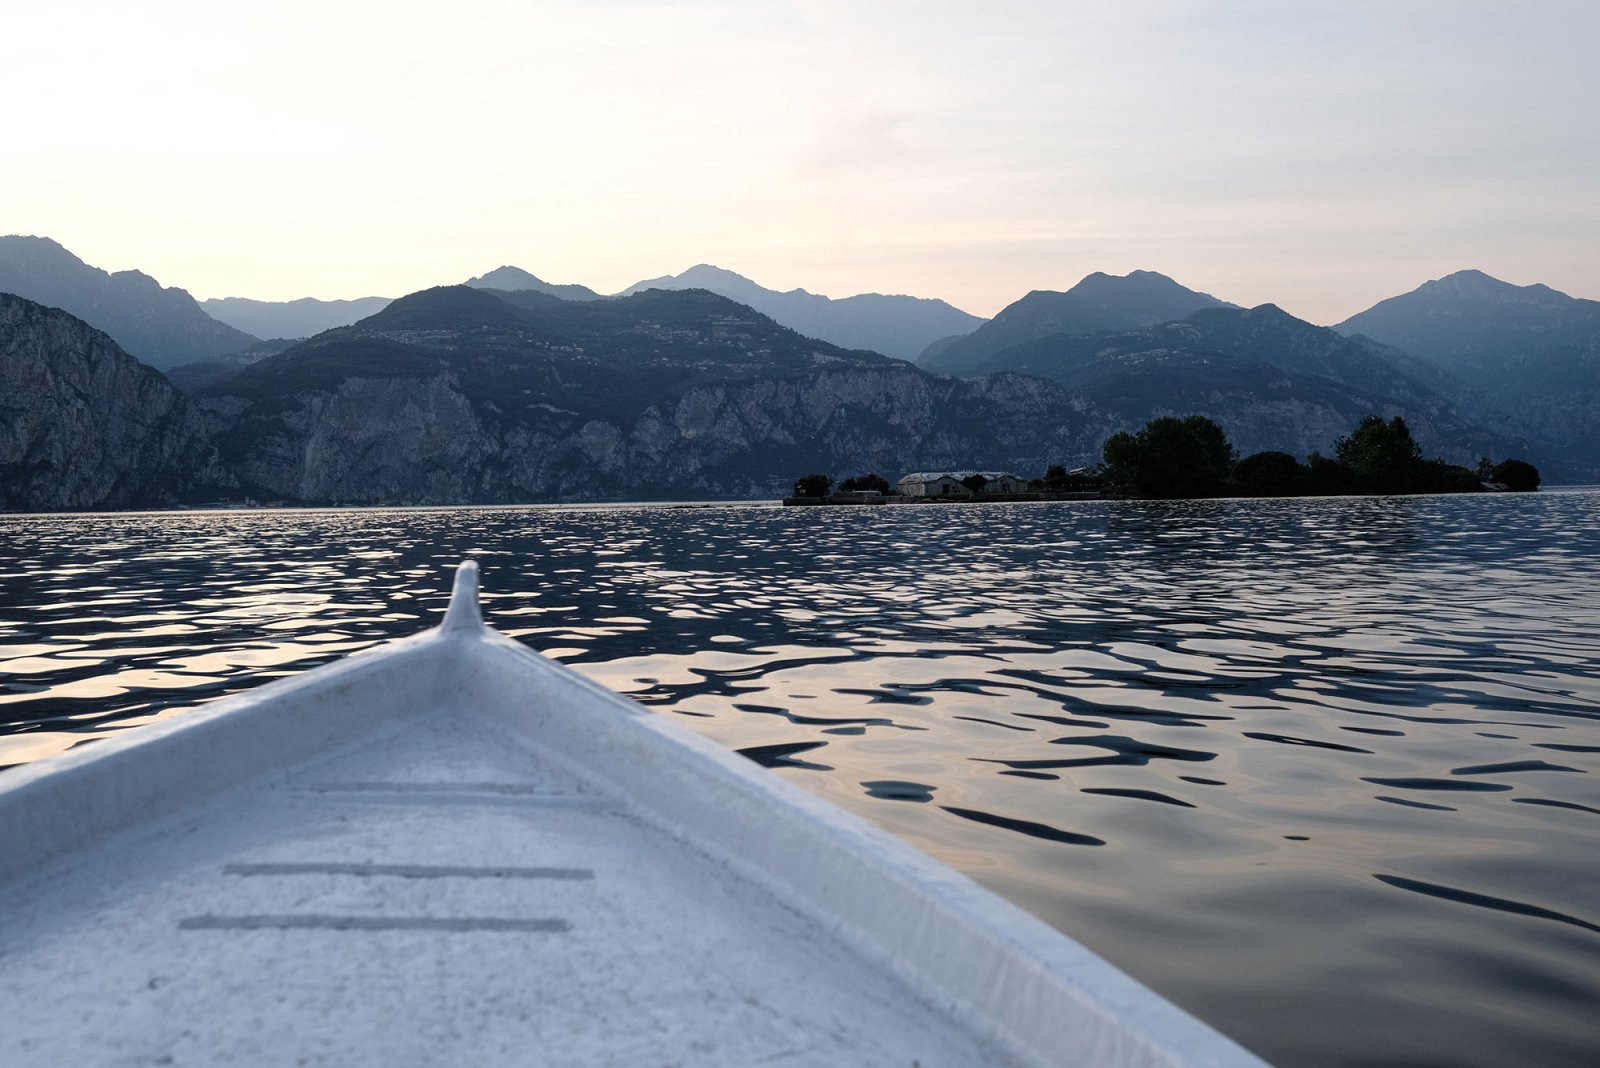 Evening boat trips to admire the sunset on Lake Garda during your holidays in Brenzone